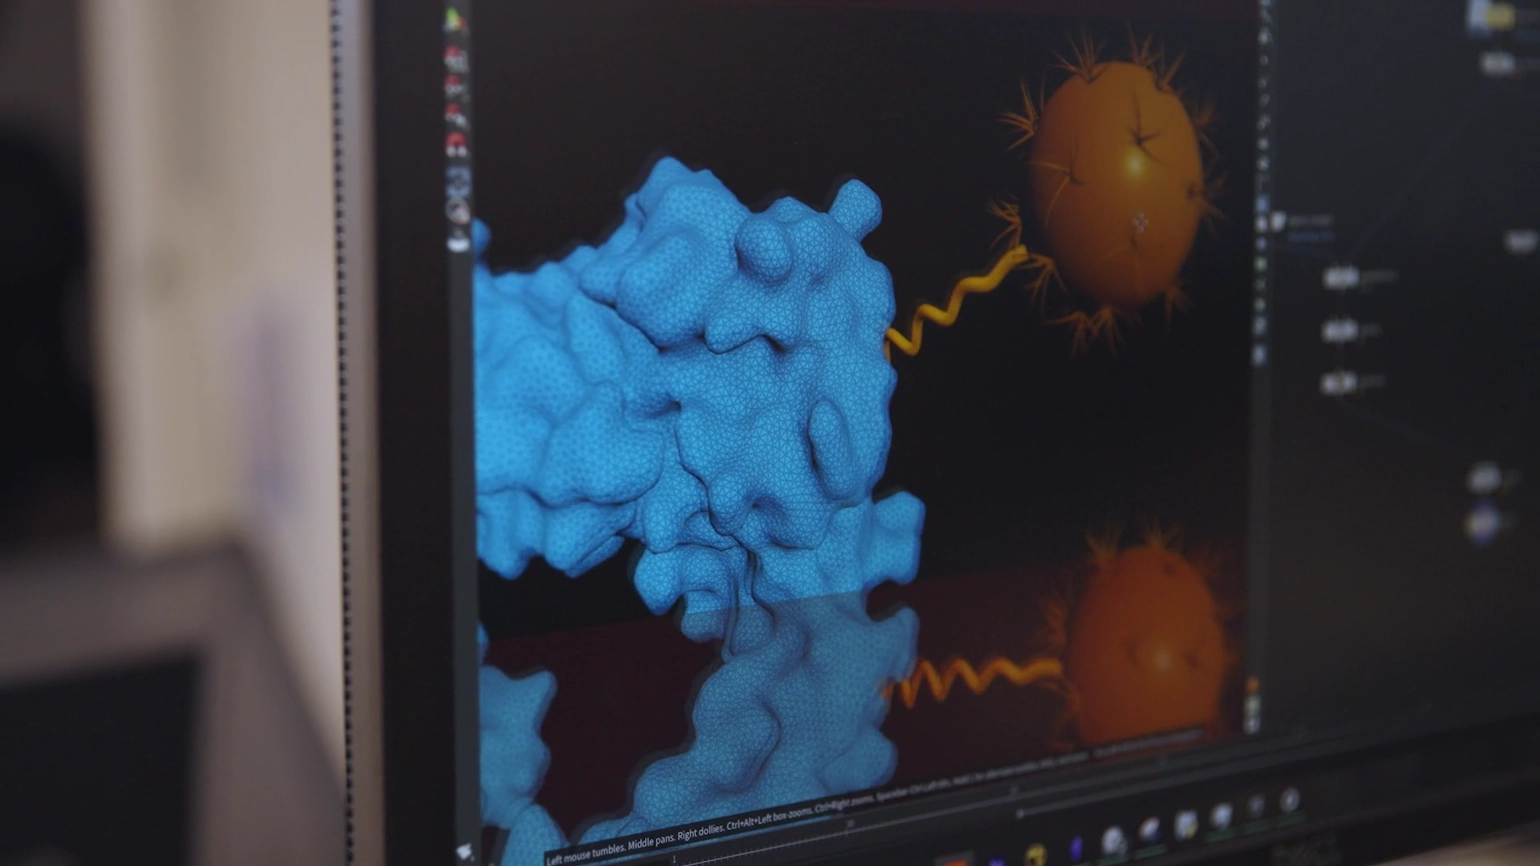 process of creating GSK scientific imagery